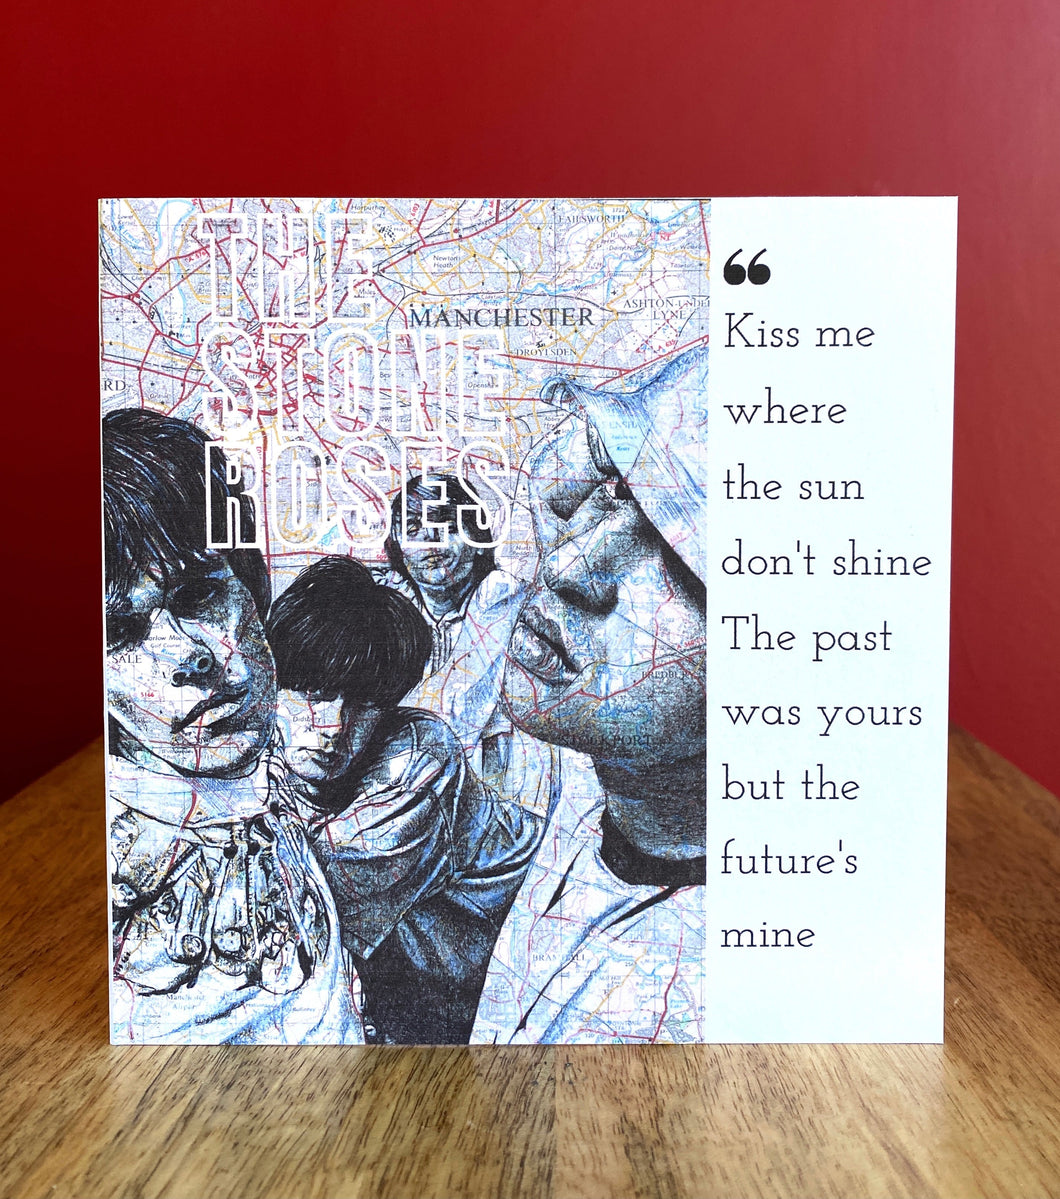 The Stone Roses Greeting Card. Printed drawing over map of Manchester. Blank